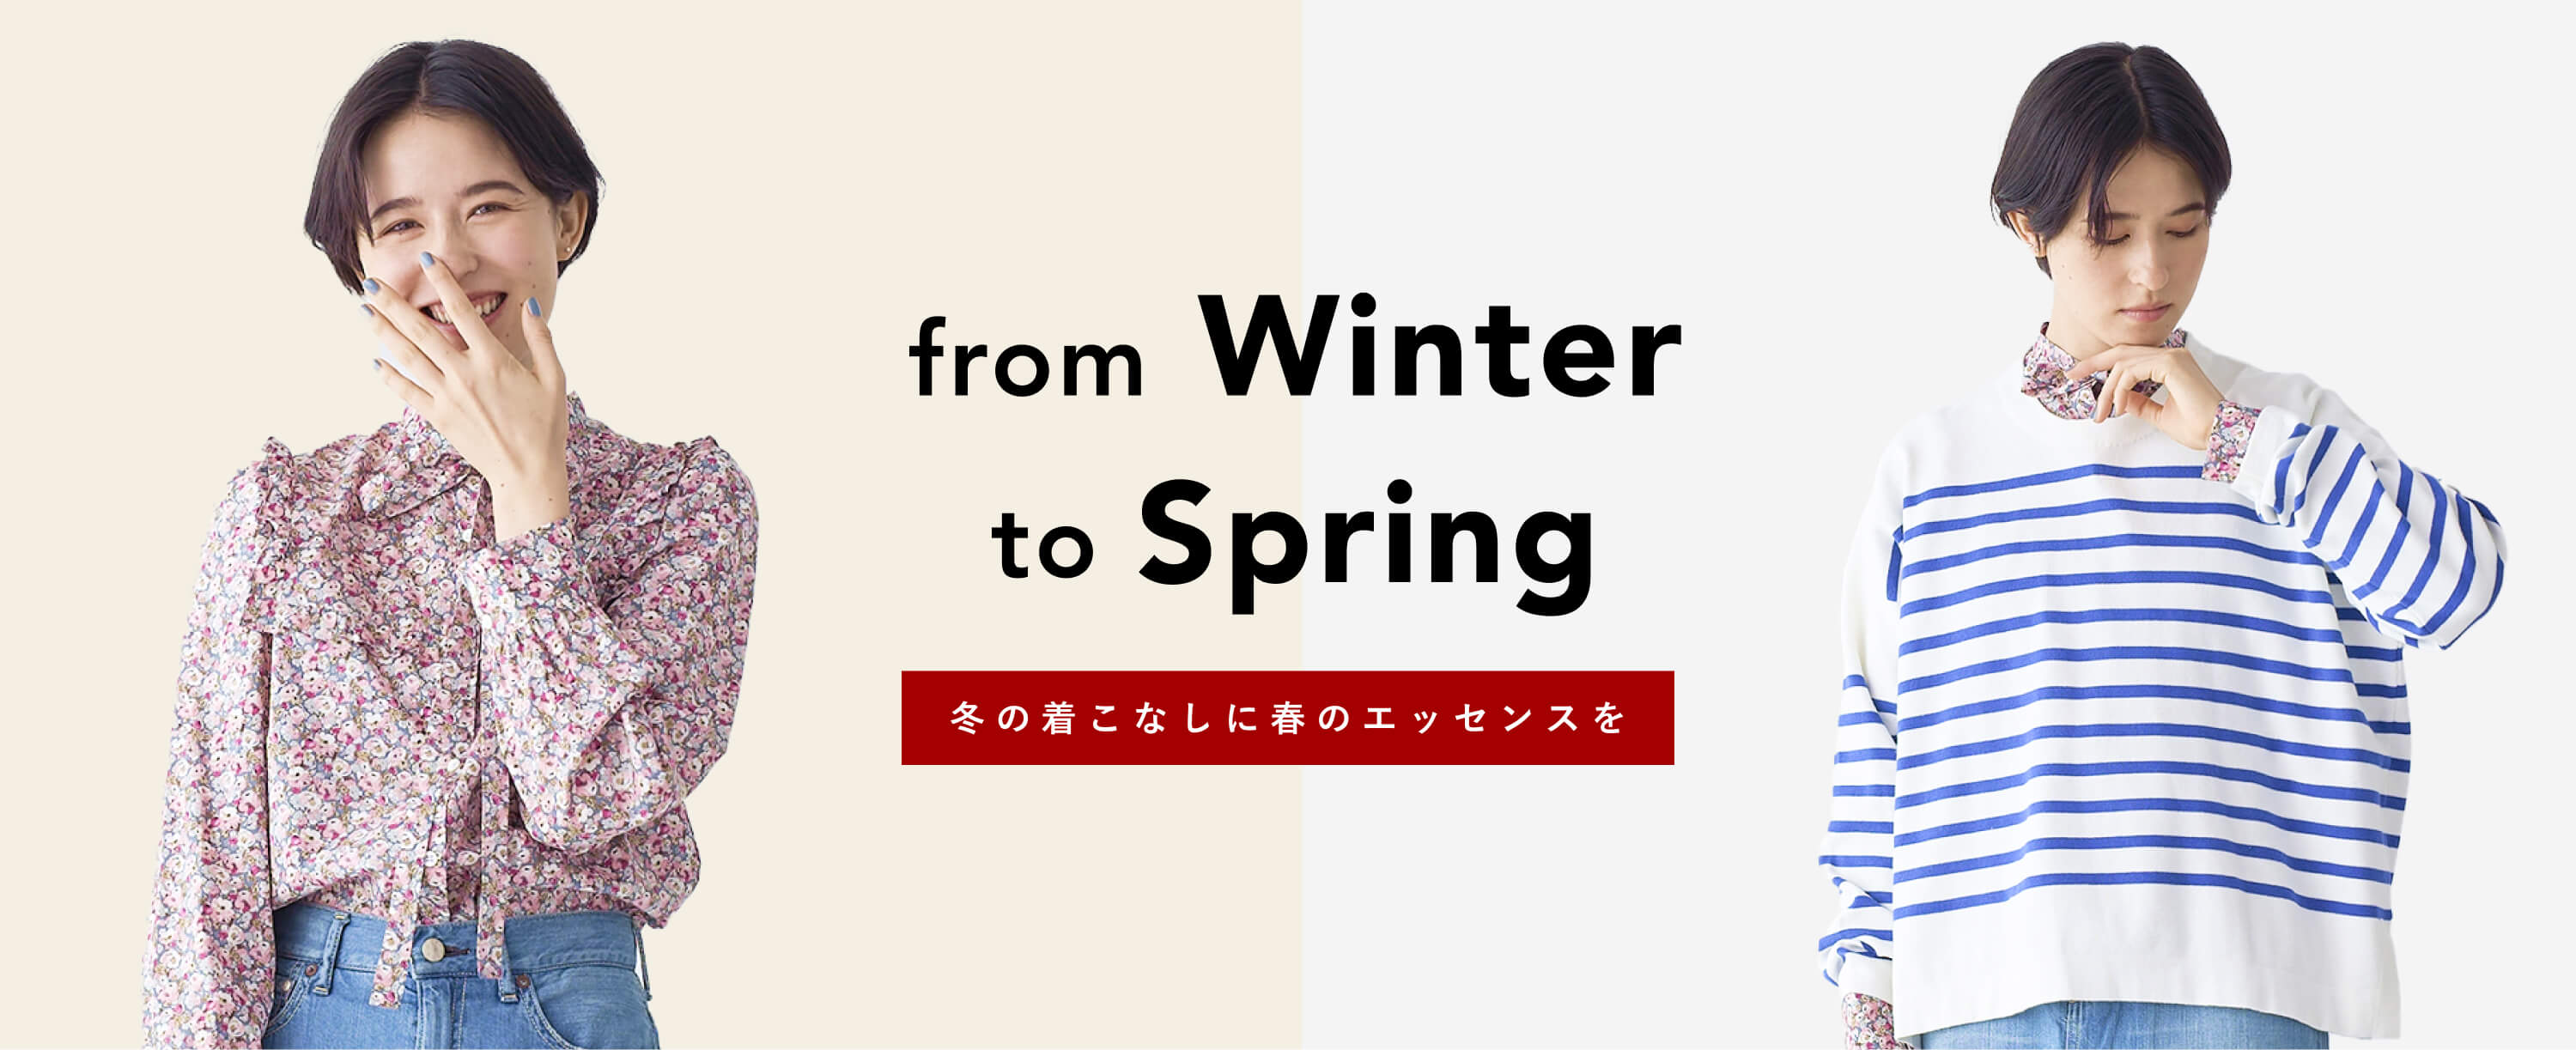 from Winter to Spring-2000x815.jpg__PID:a2cdfe76-abd8-4188-bd02-ae5998450621